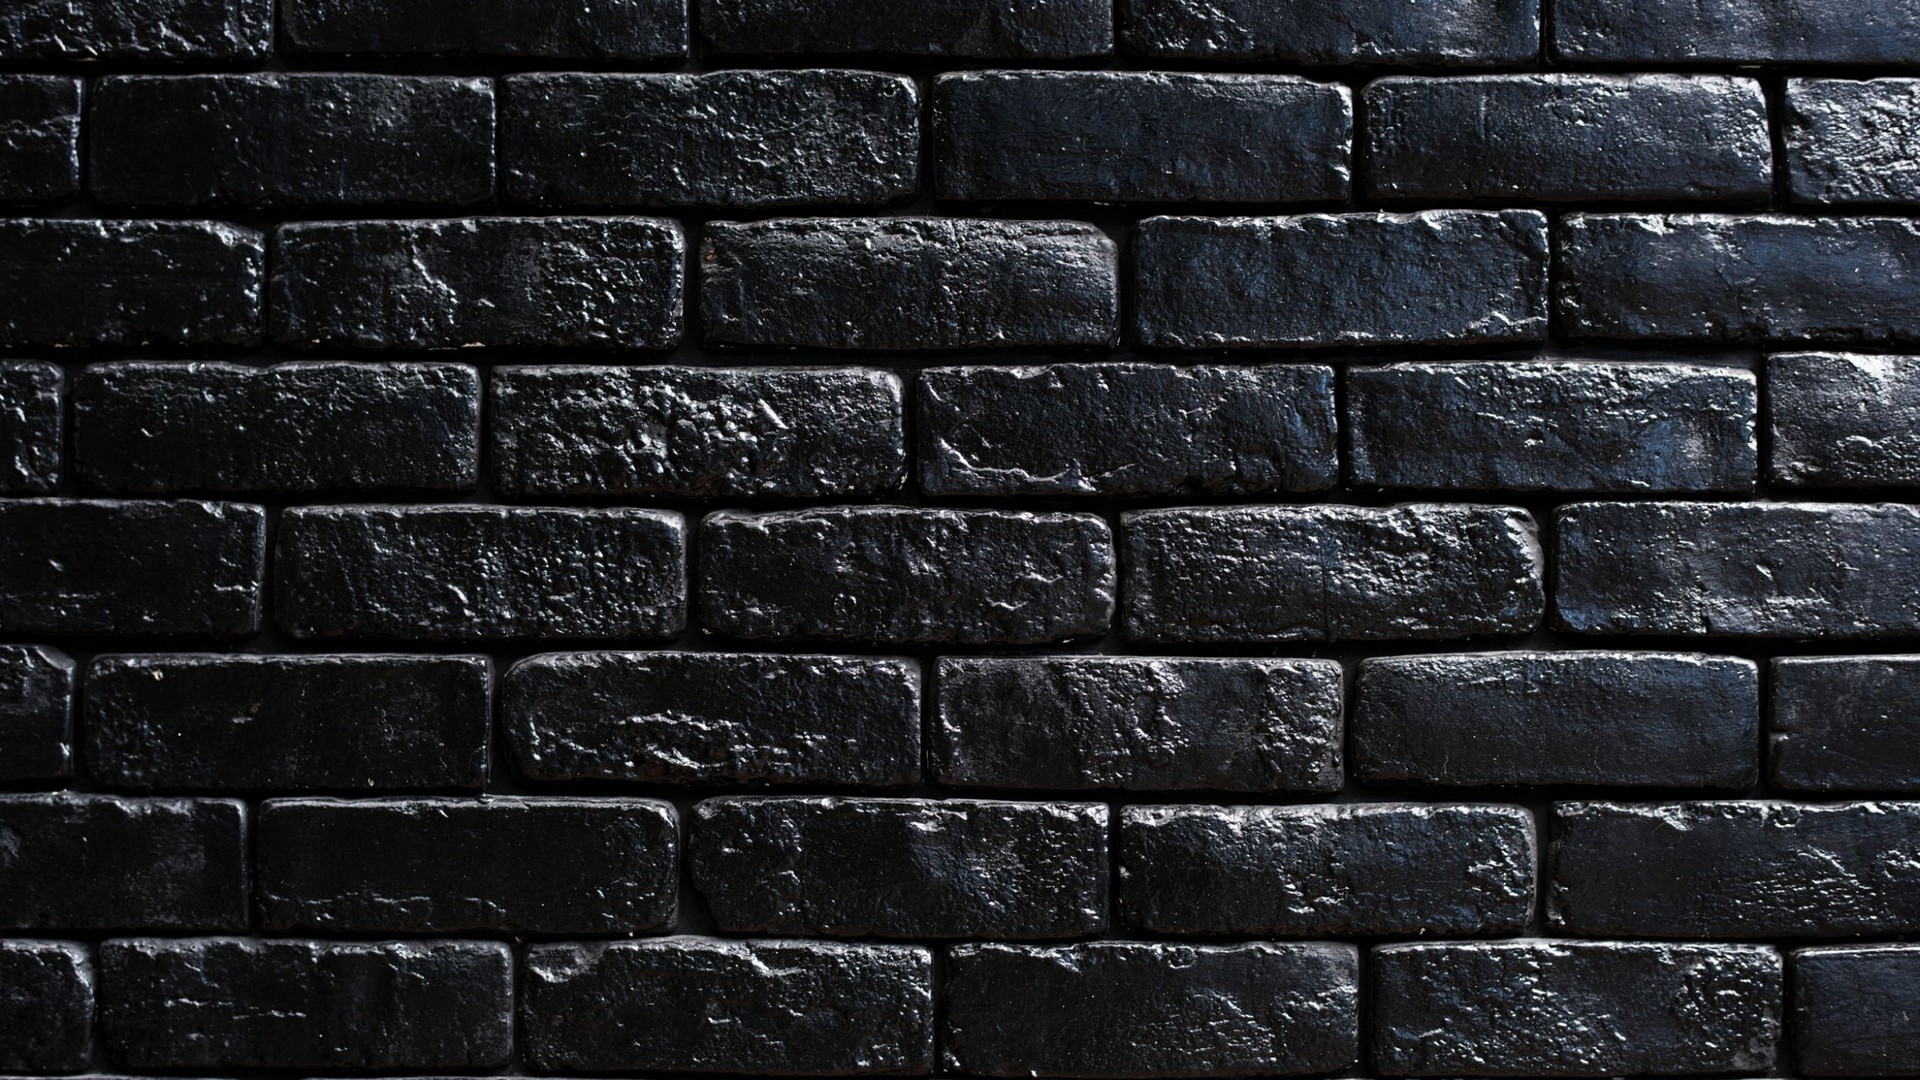 Brick Wallpaper For Desktop With high-resolution 1920X1080 pixel. You can use this wallpaper for your Windows and Mac OS computers as well as your Android and iPhone smartphones